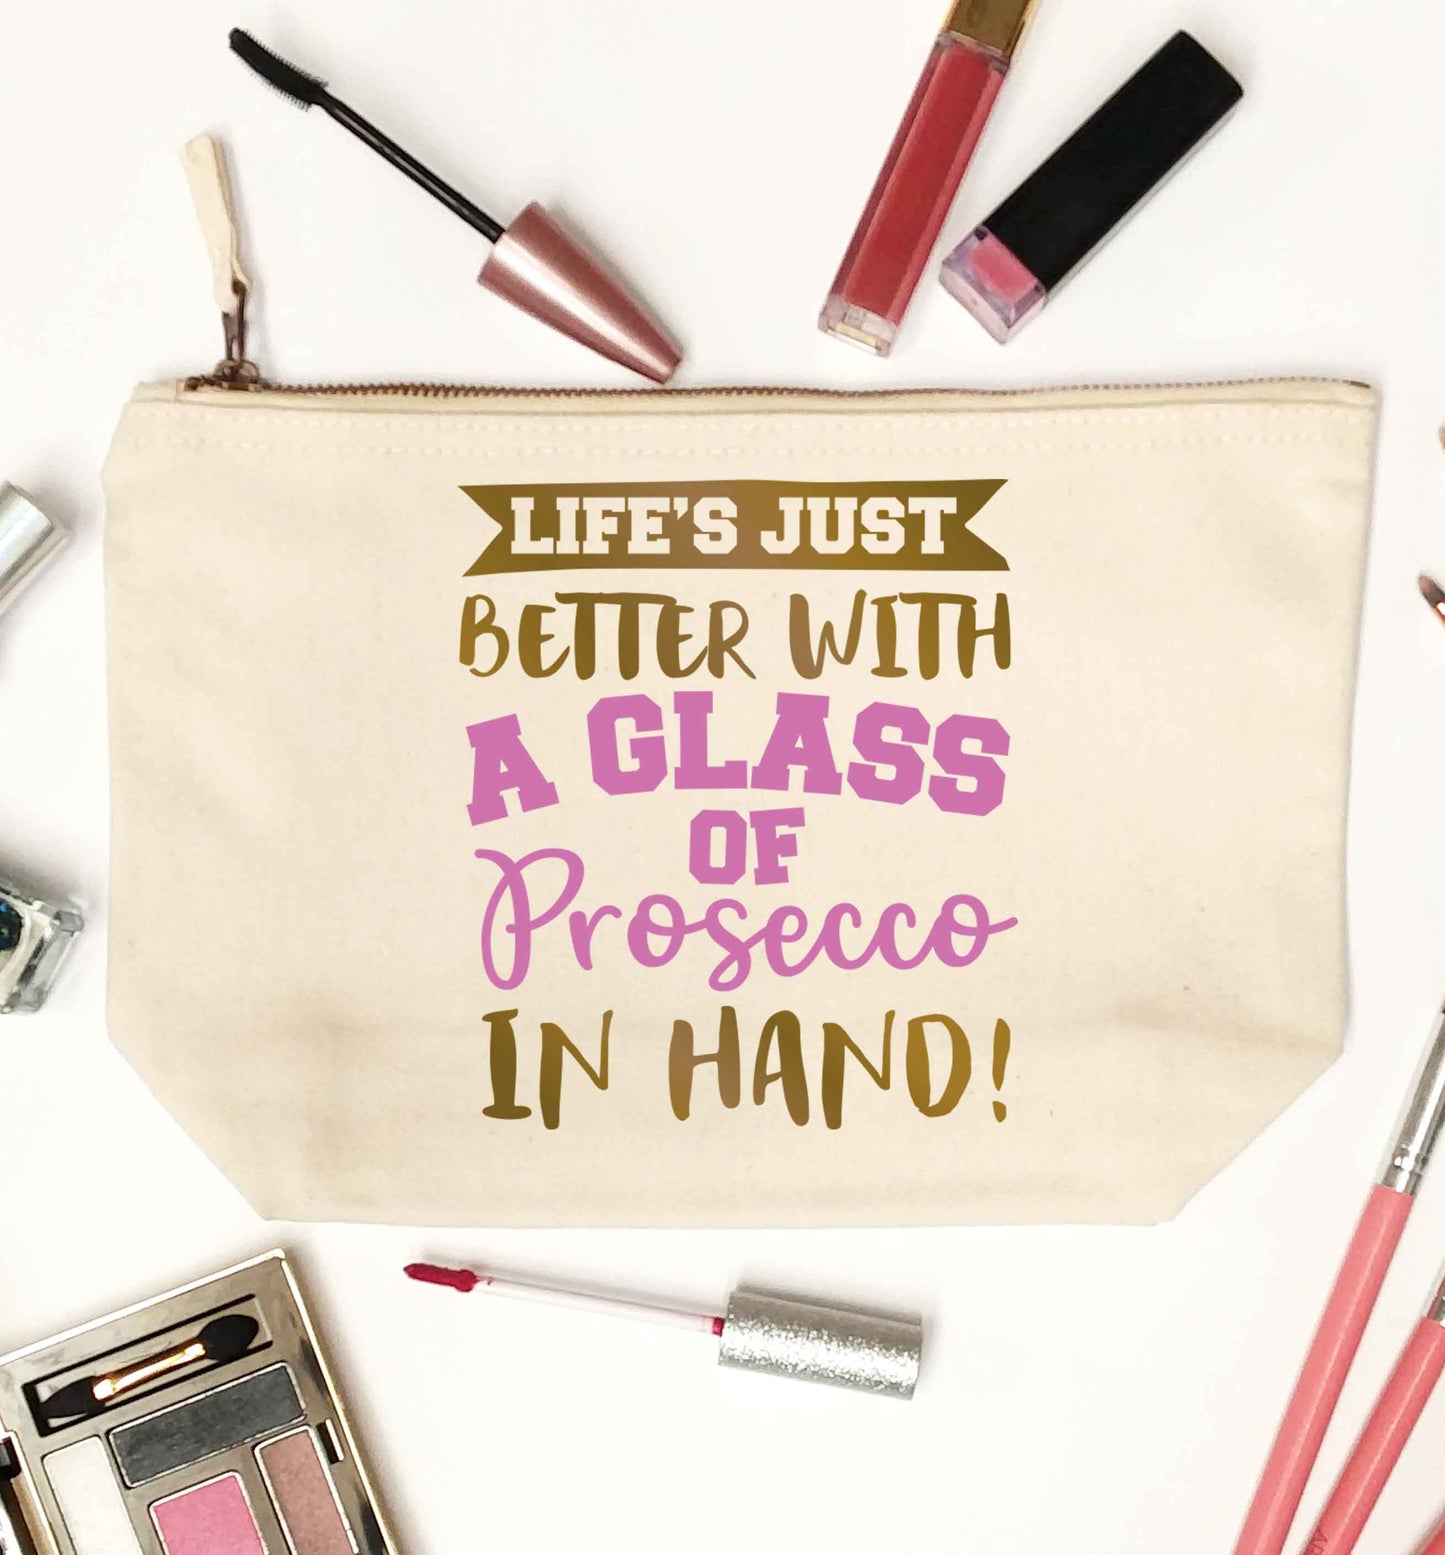 Life's just better with a glass of prosecco in hand natural makeup bag